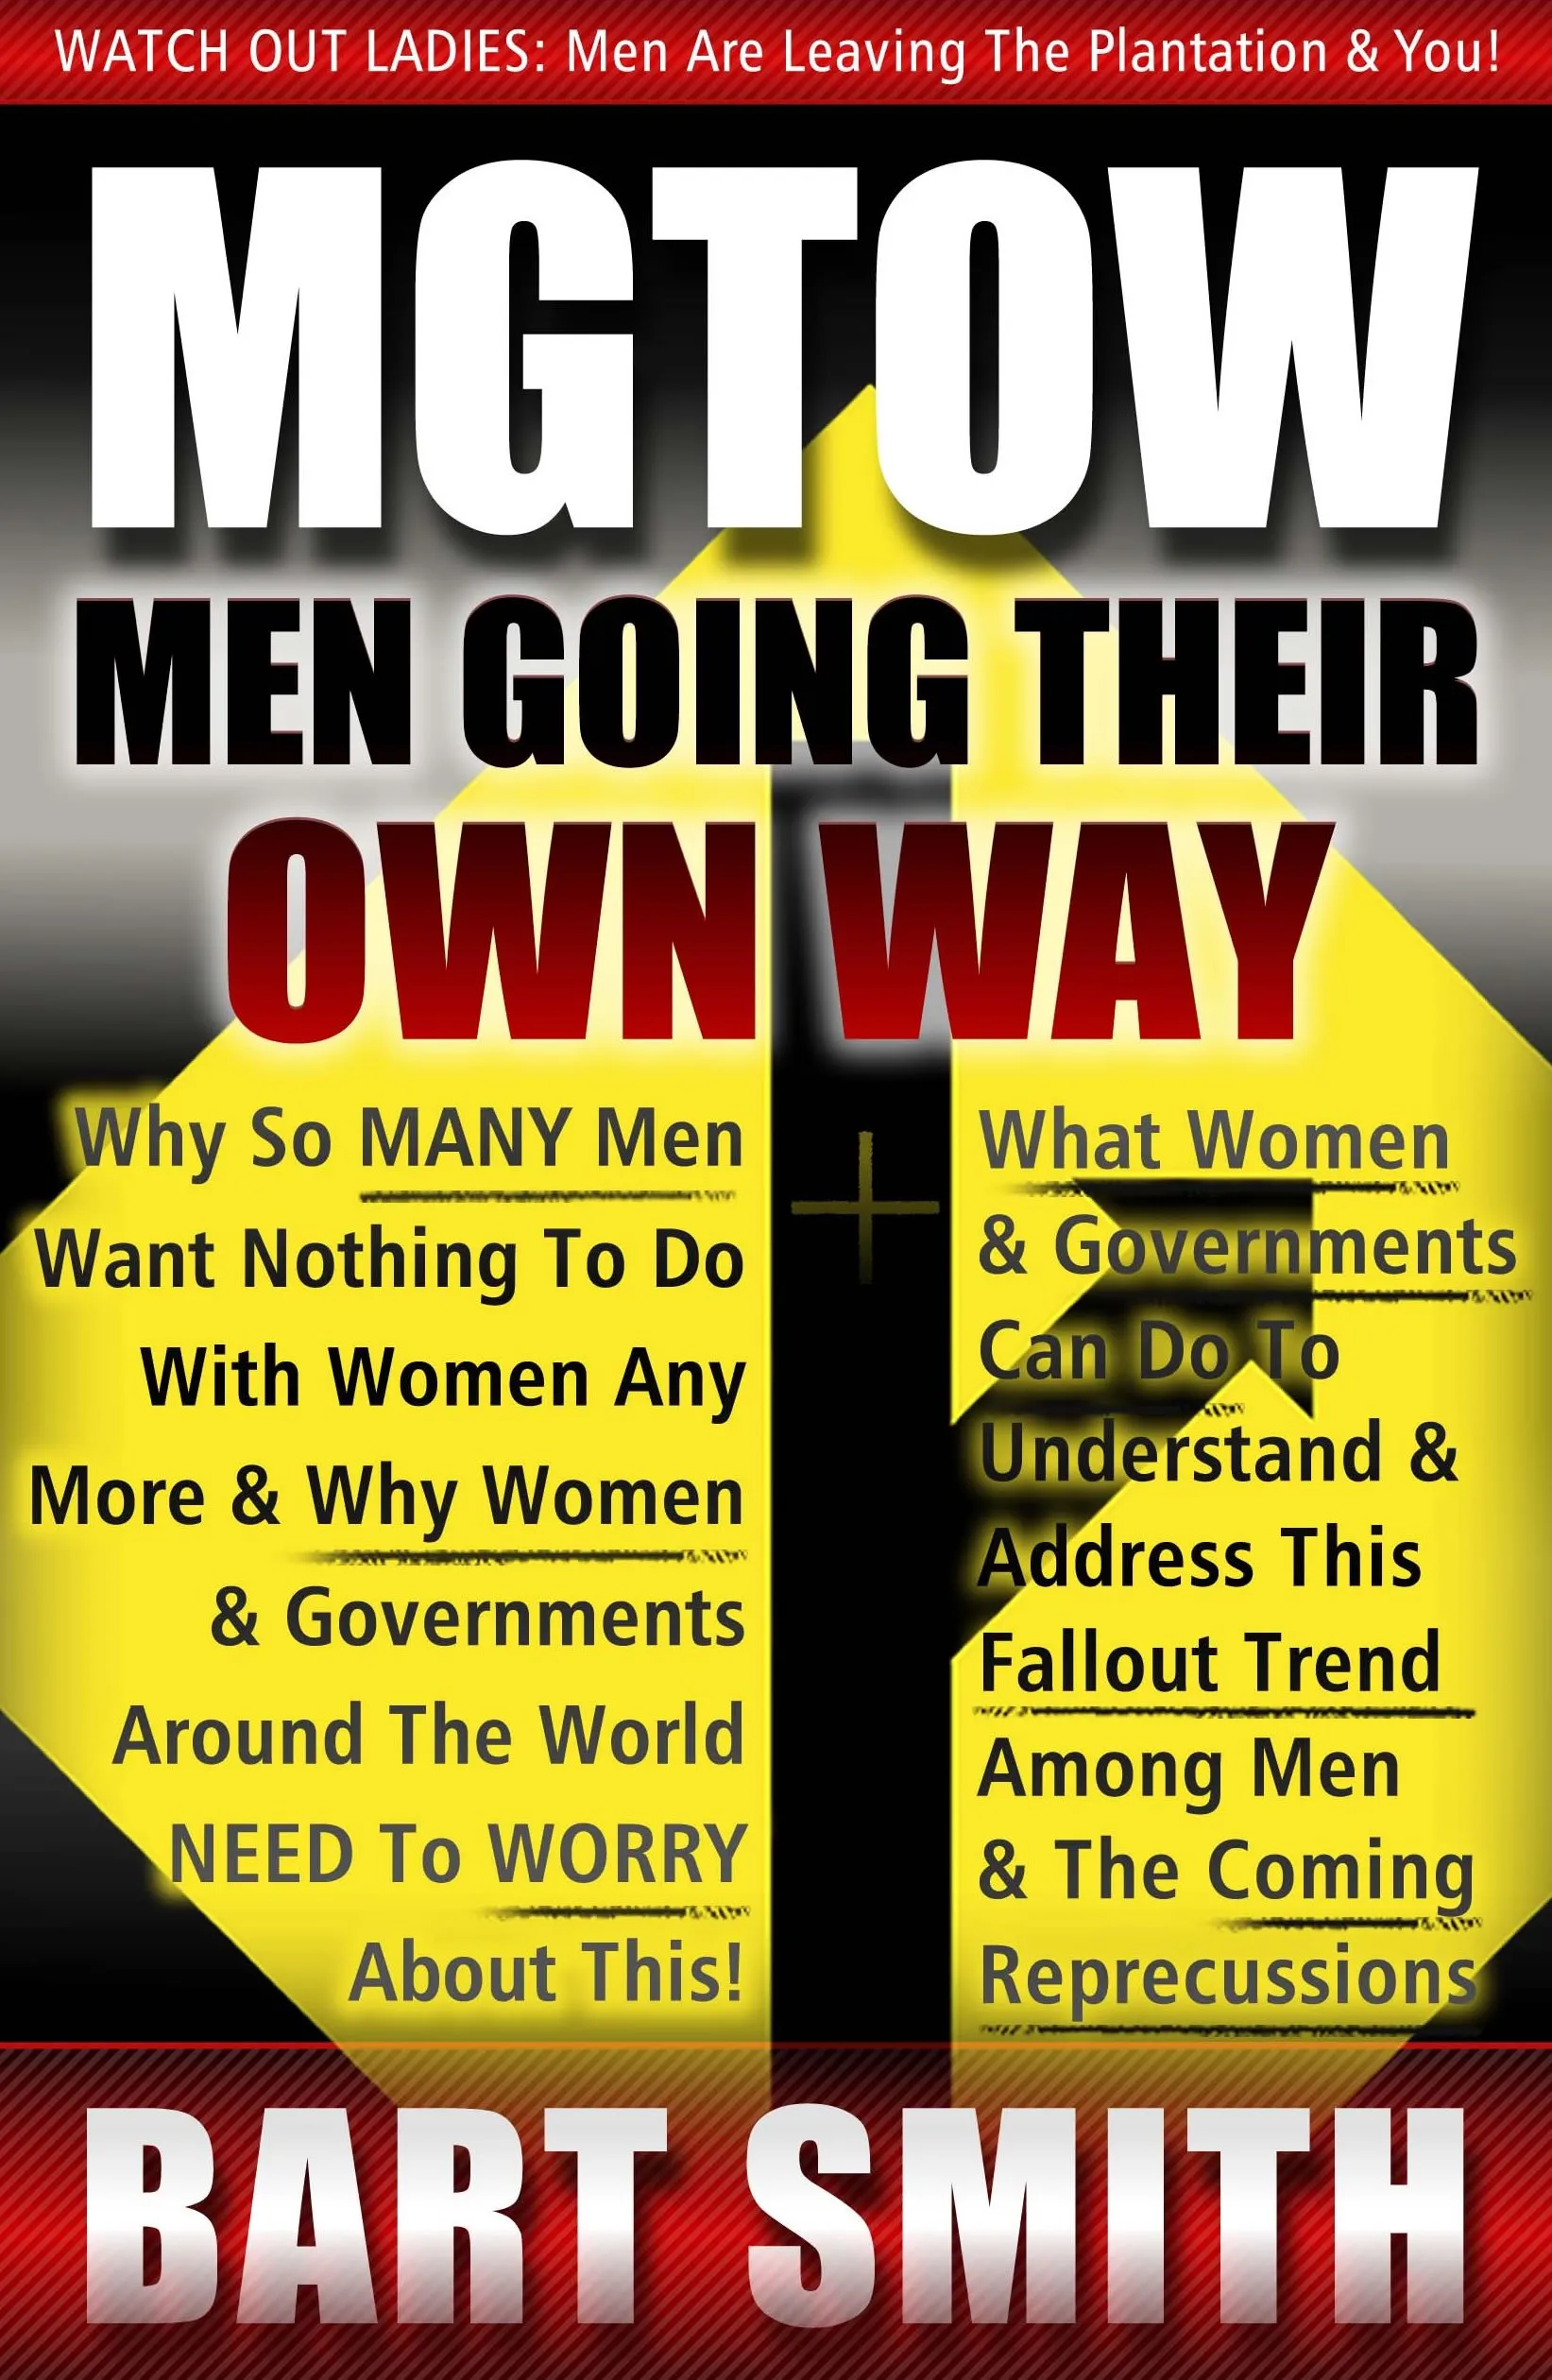 M.G.T.O.W.  Men Going Their Own Way: Why So Many Men Want Nothing To Do With Women Any More & Why Women, Companies & Governments Around The World Need To Worry About This!  by Bart Smith